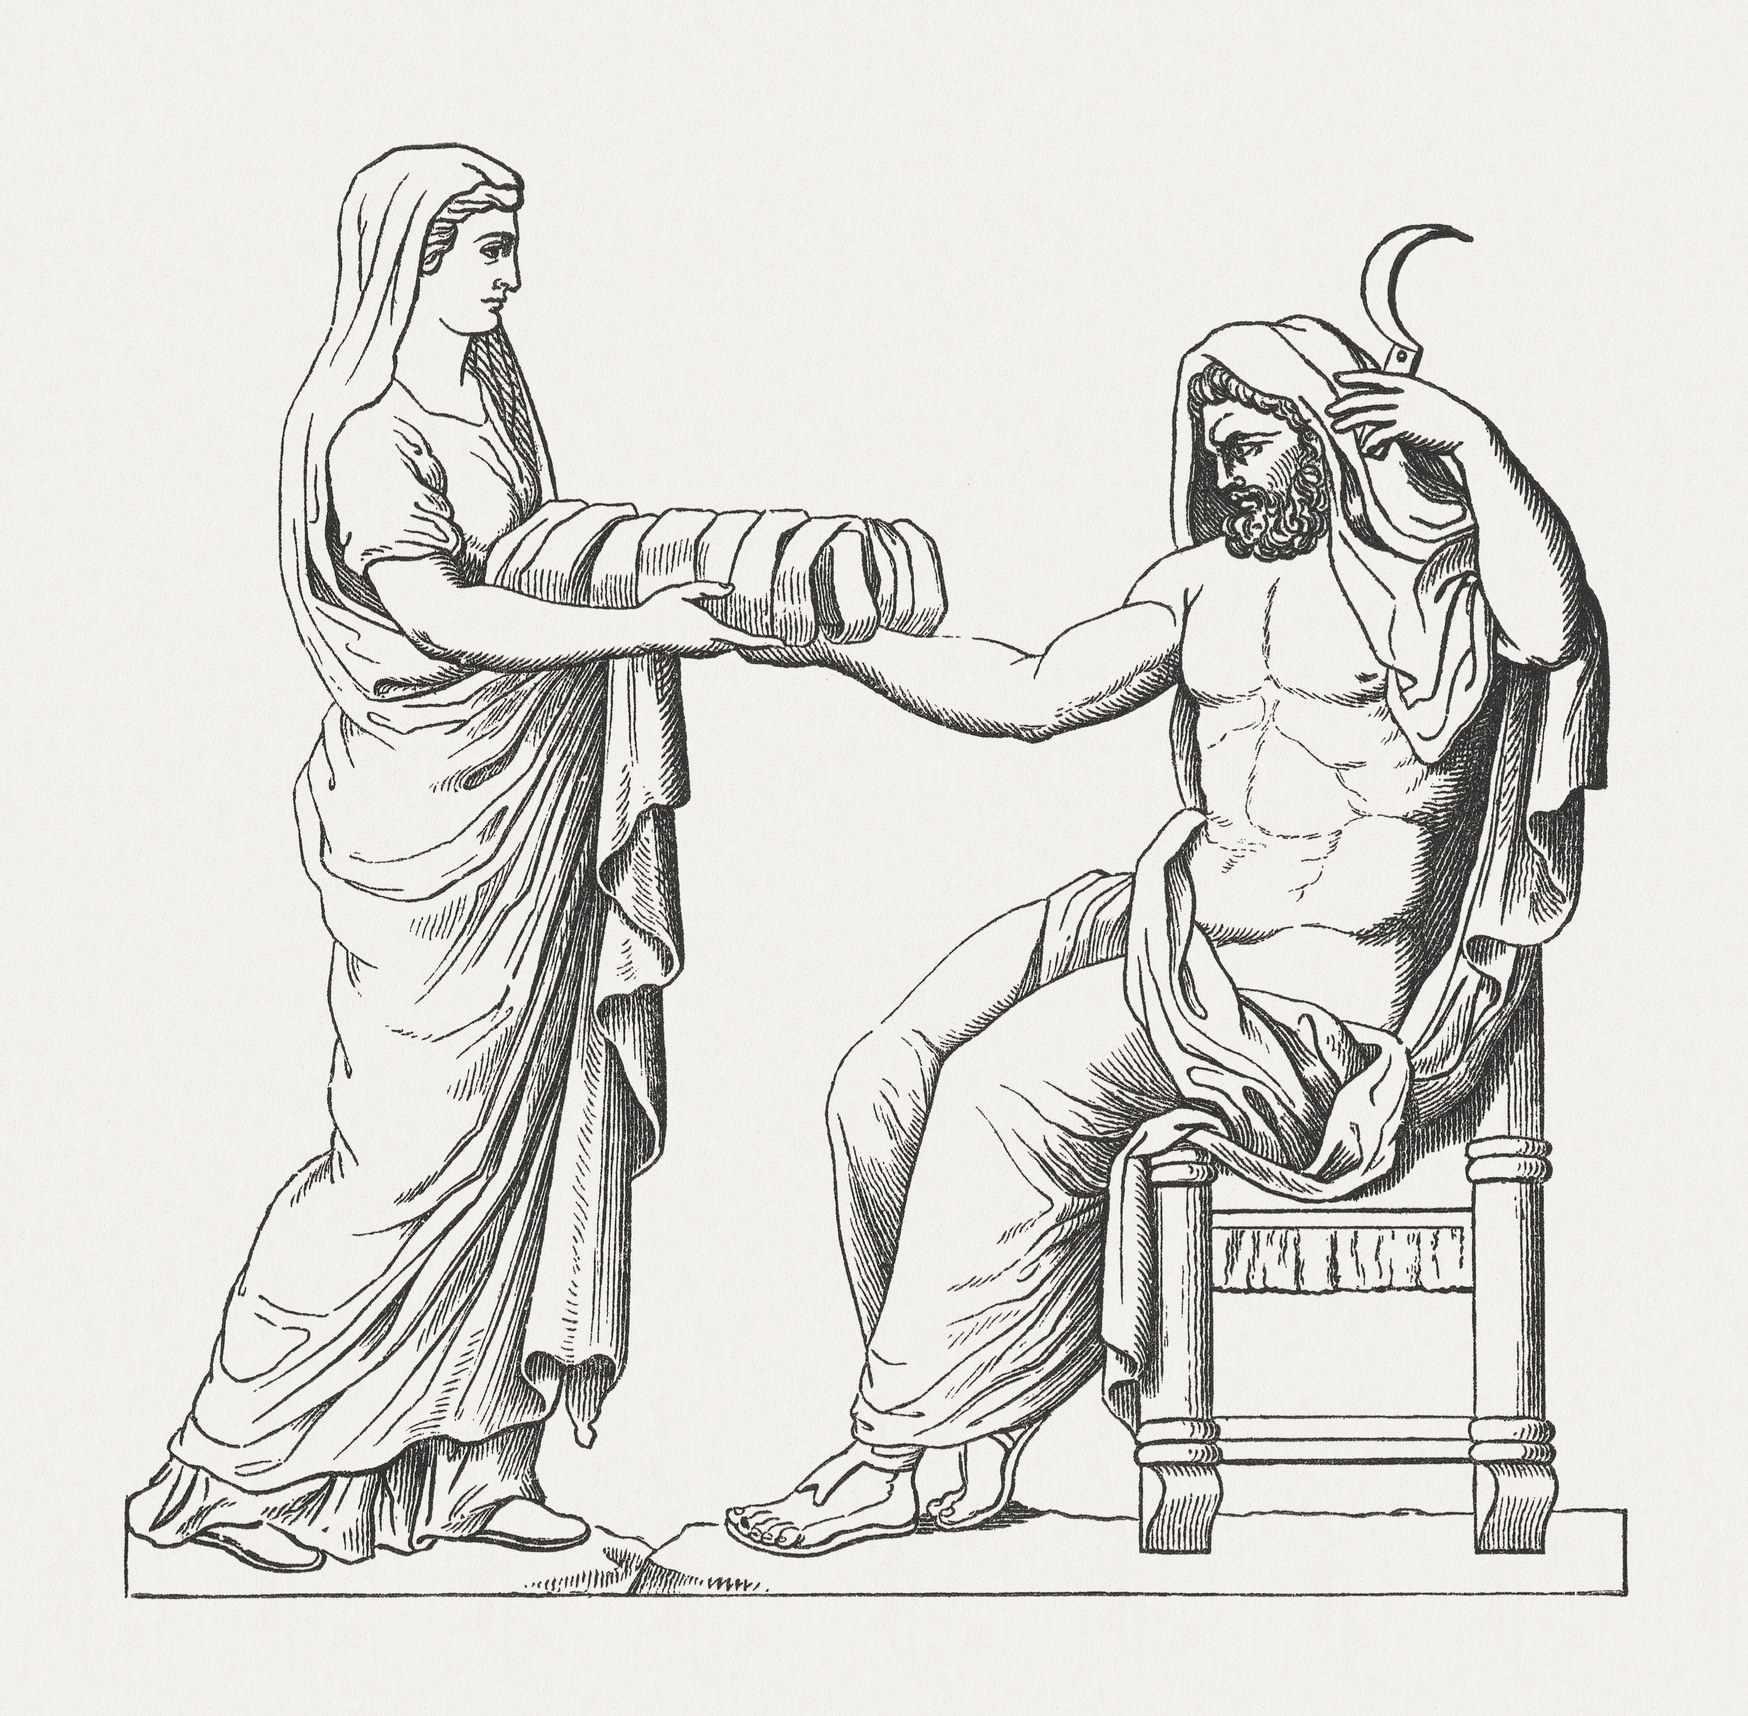 Rhea presenting Kronos with the stone wrapped in cloth